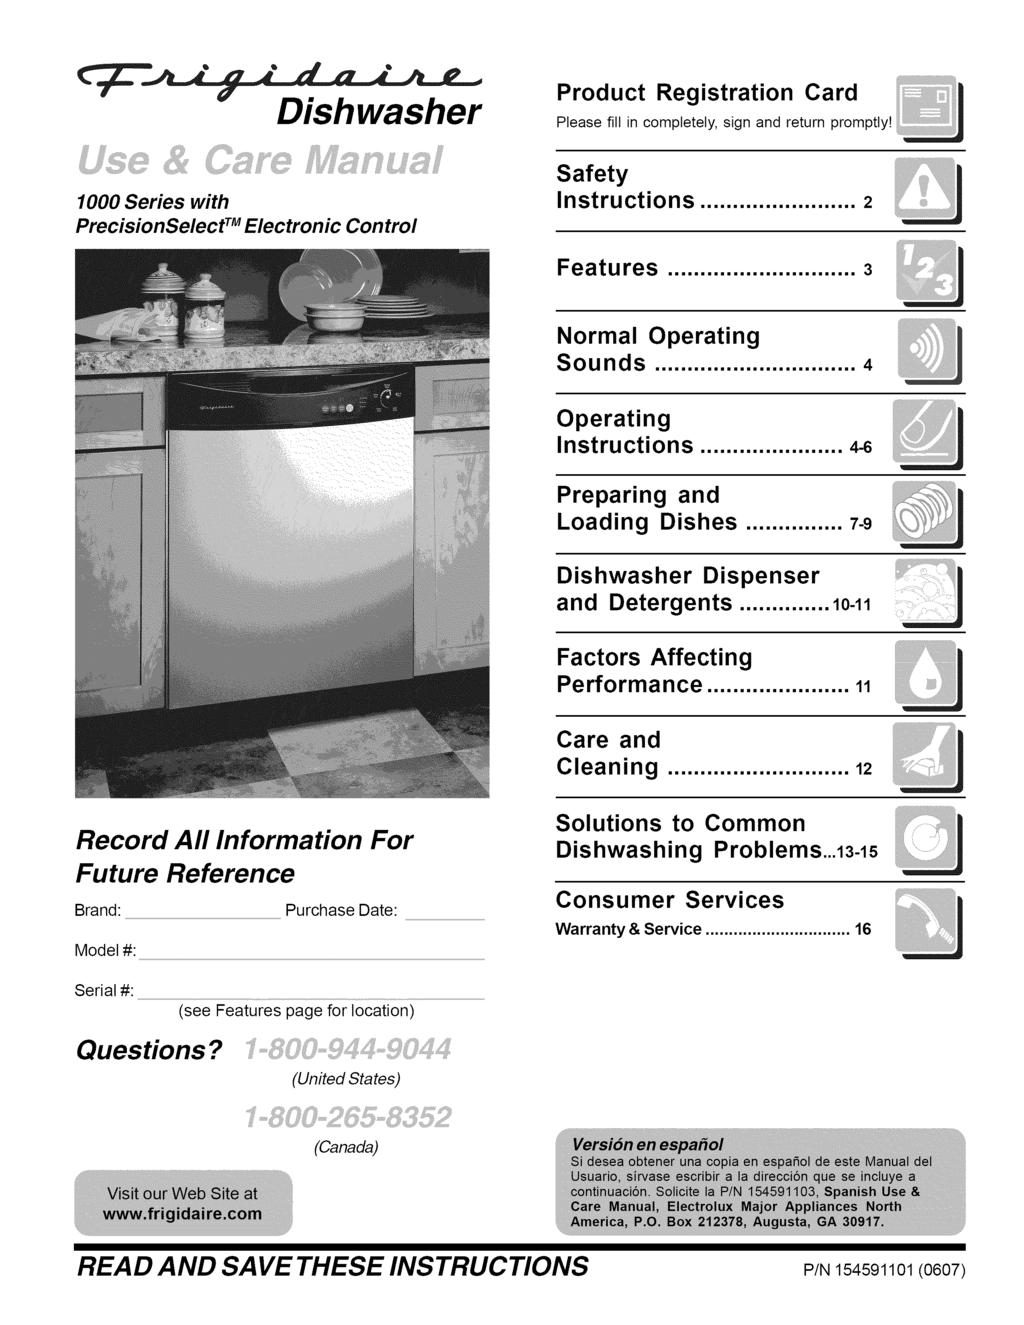 Dishwasher Product Registration Card Please fill in completely, sign and return promptly! 1000 Series with PrecisionSelect TM Electronic Control Safety Instructions... 2 Features.